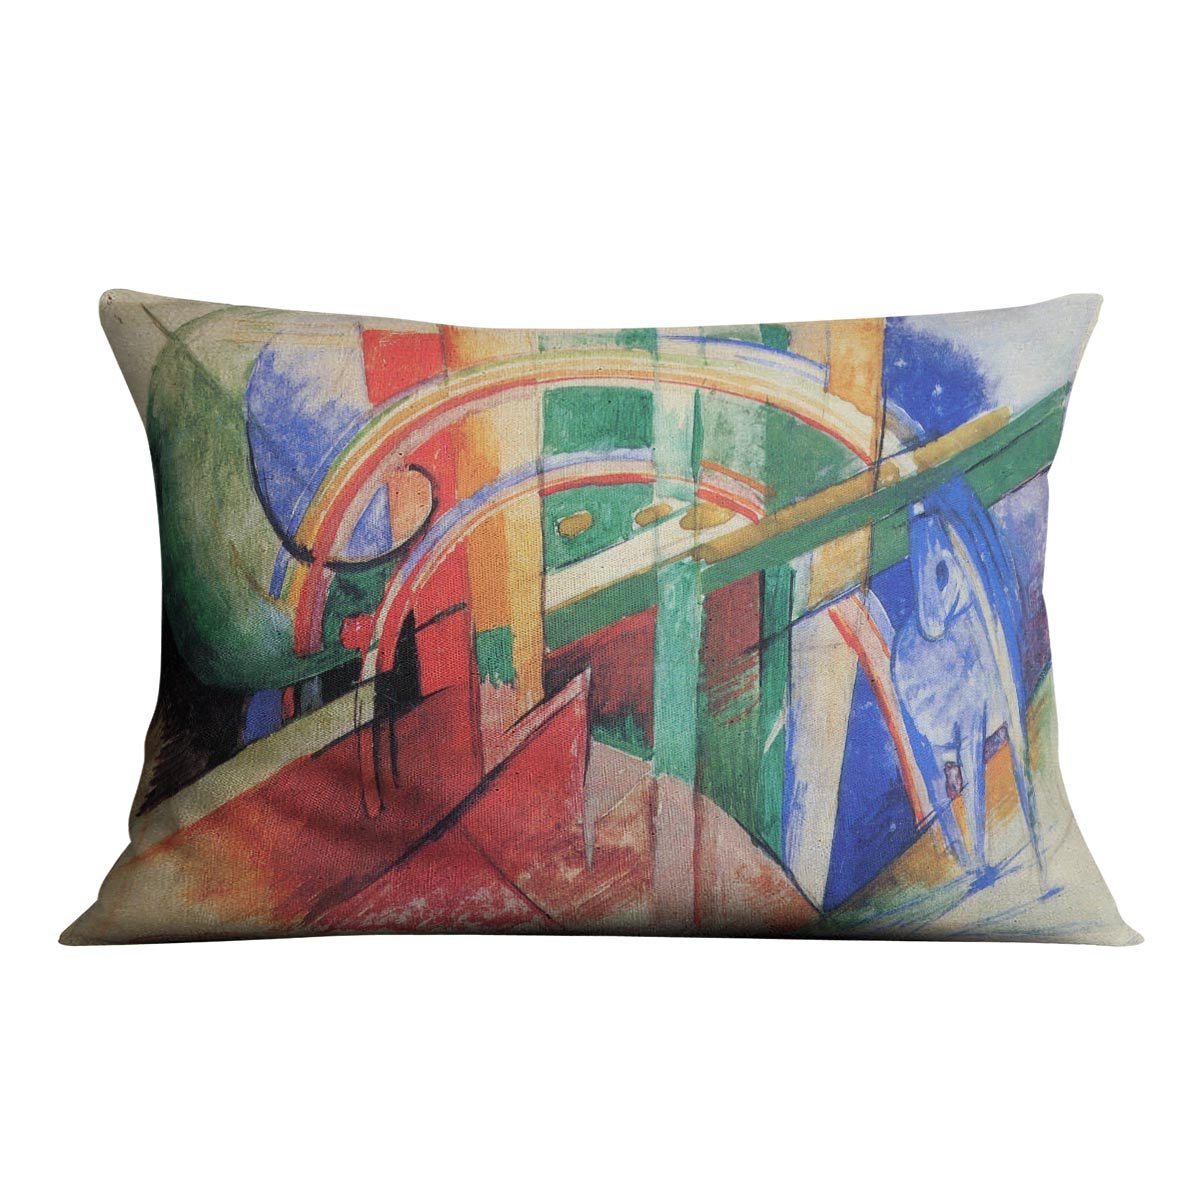 Blue horse with rainbow by Franz Marc Throw Pillow